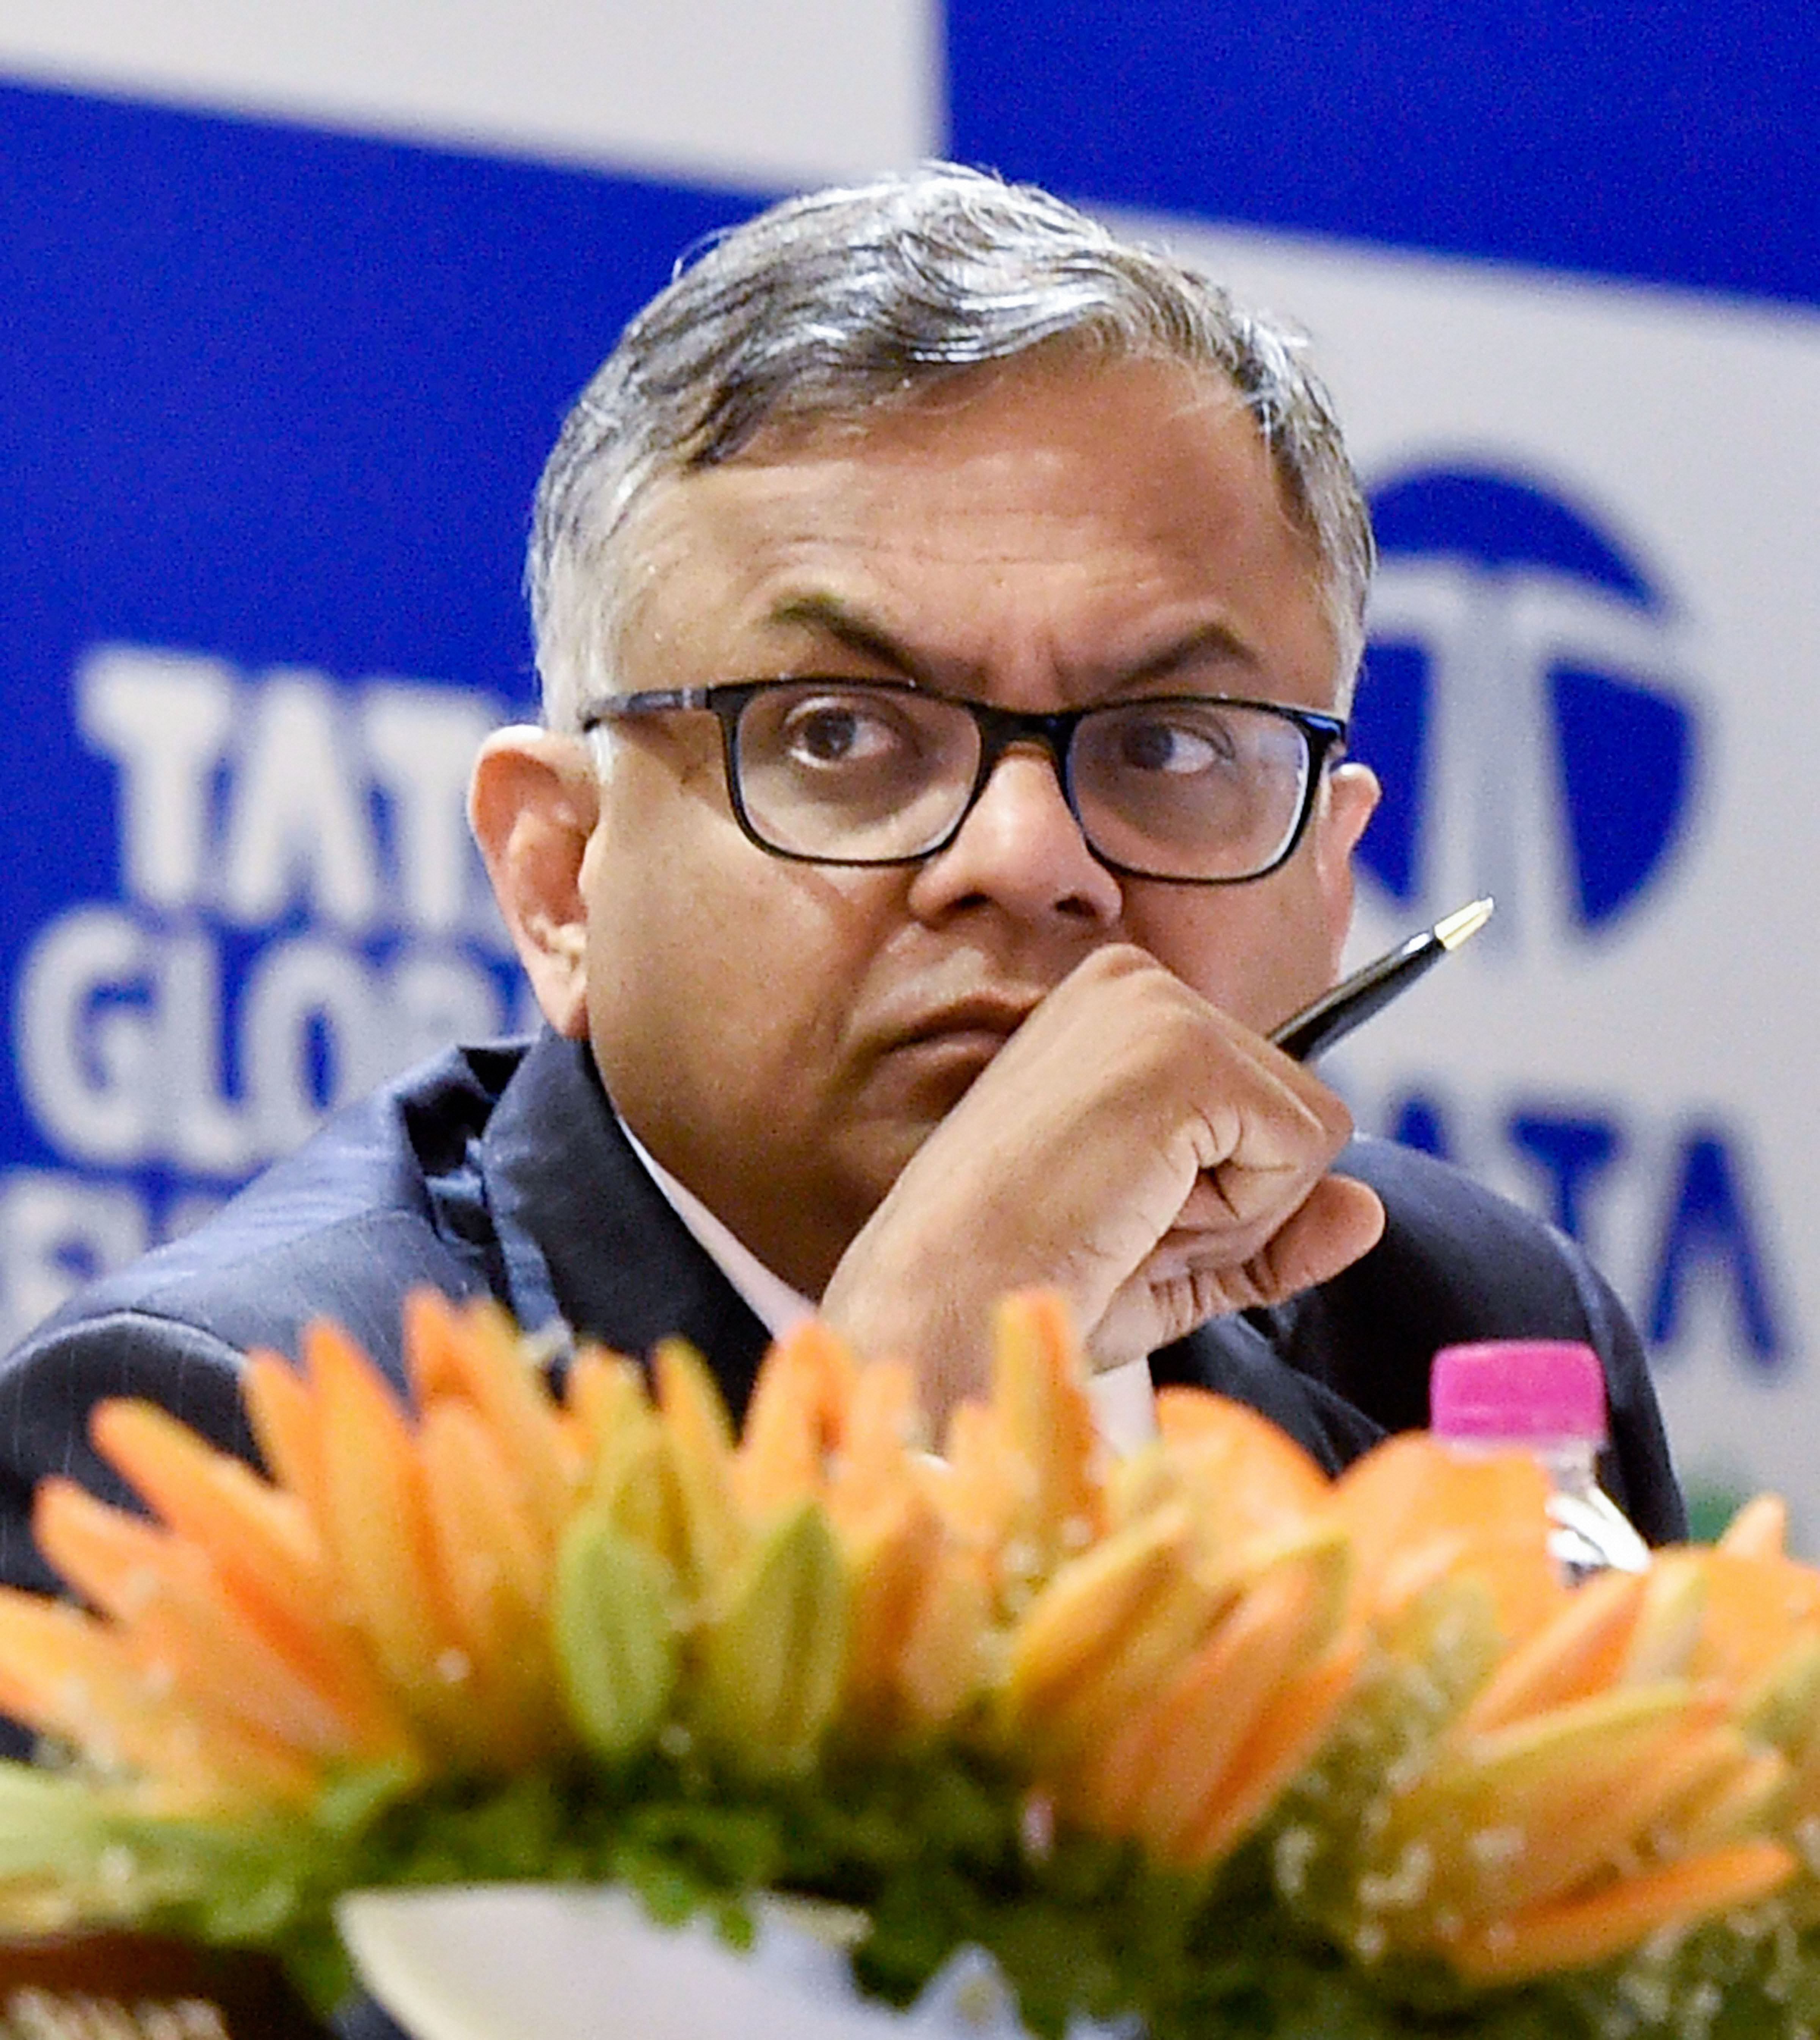 Tata Global Beverages Chairman N Chandrasekaran looks on during the company's 55th Annual General Meeting, in Kolkata on Thursday, July 05, 2018. Credit: PTI Photo